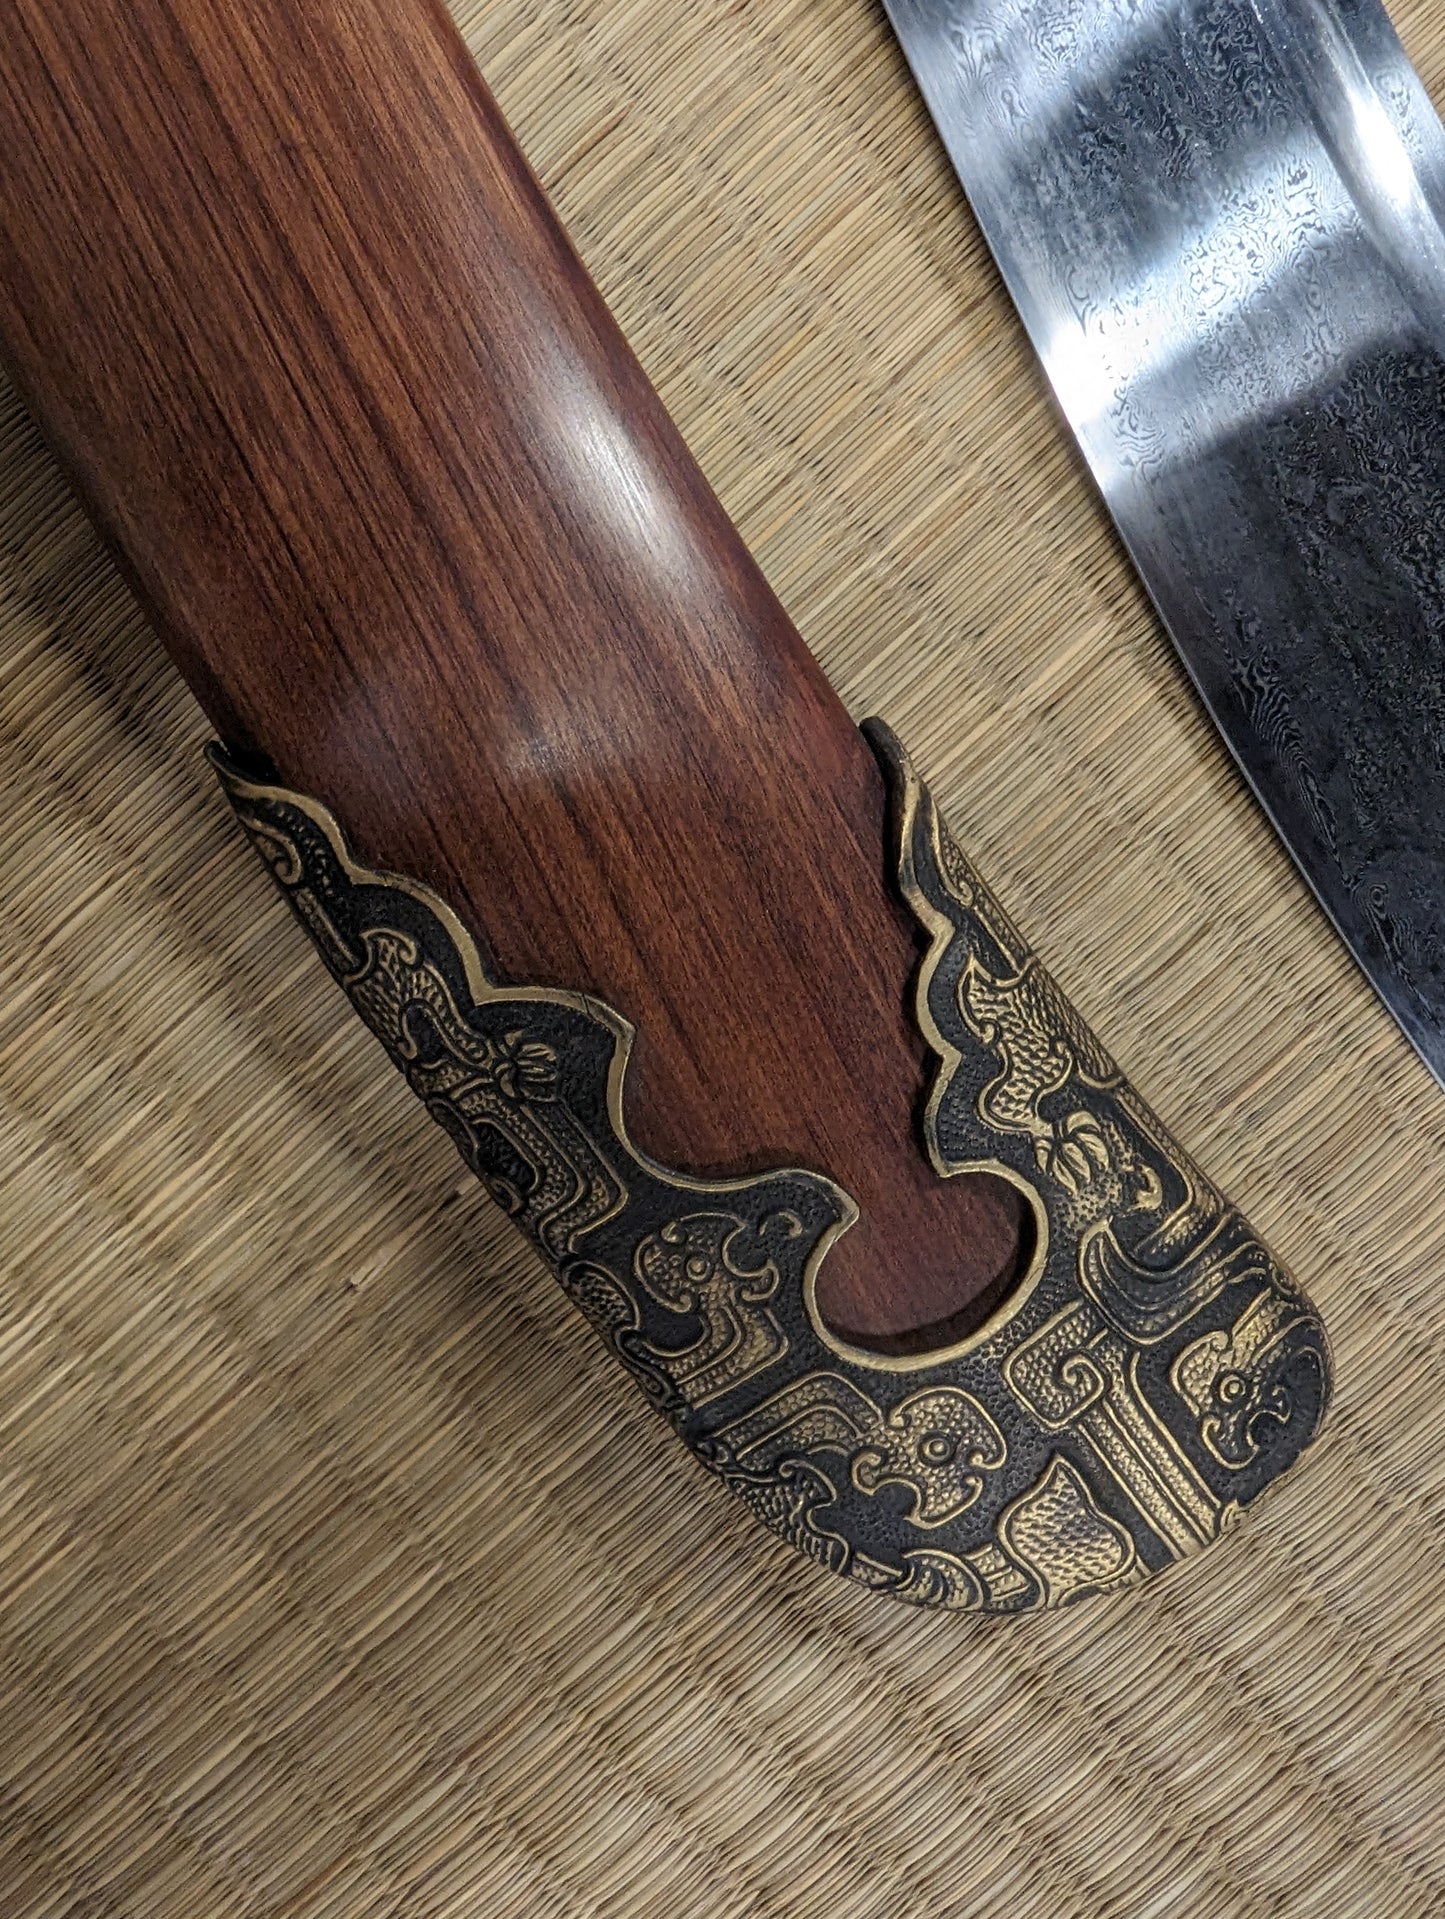 Oxtail Saber-  Damascus Steel